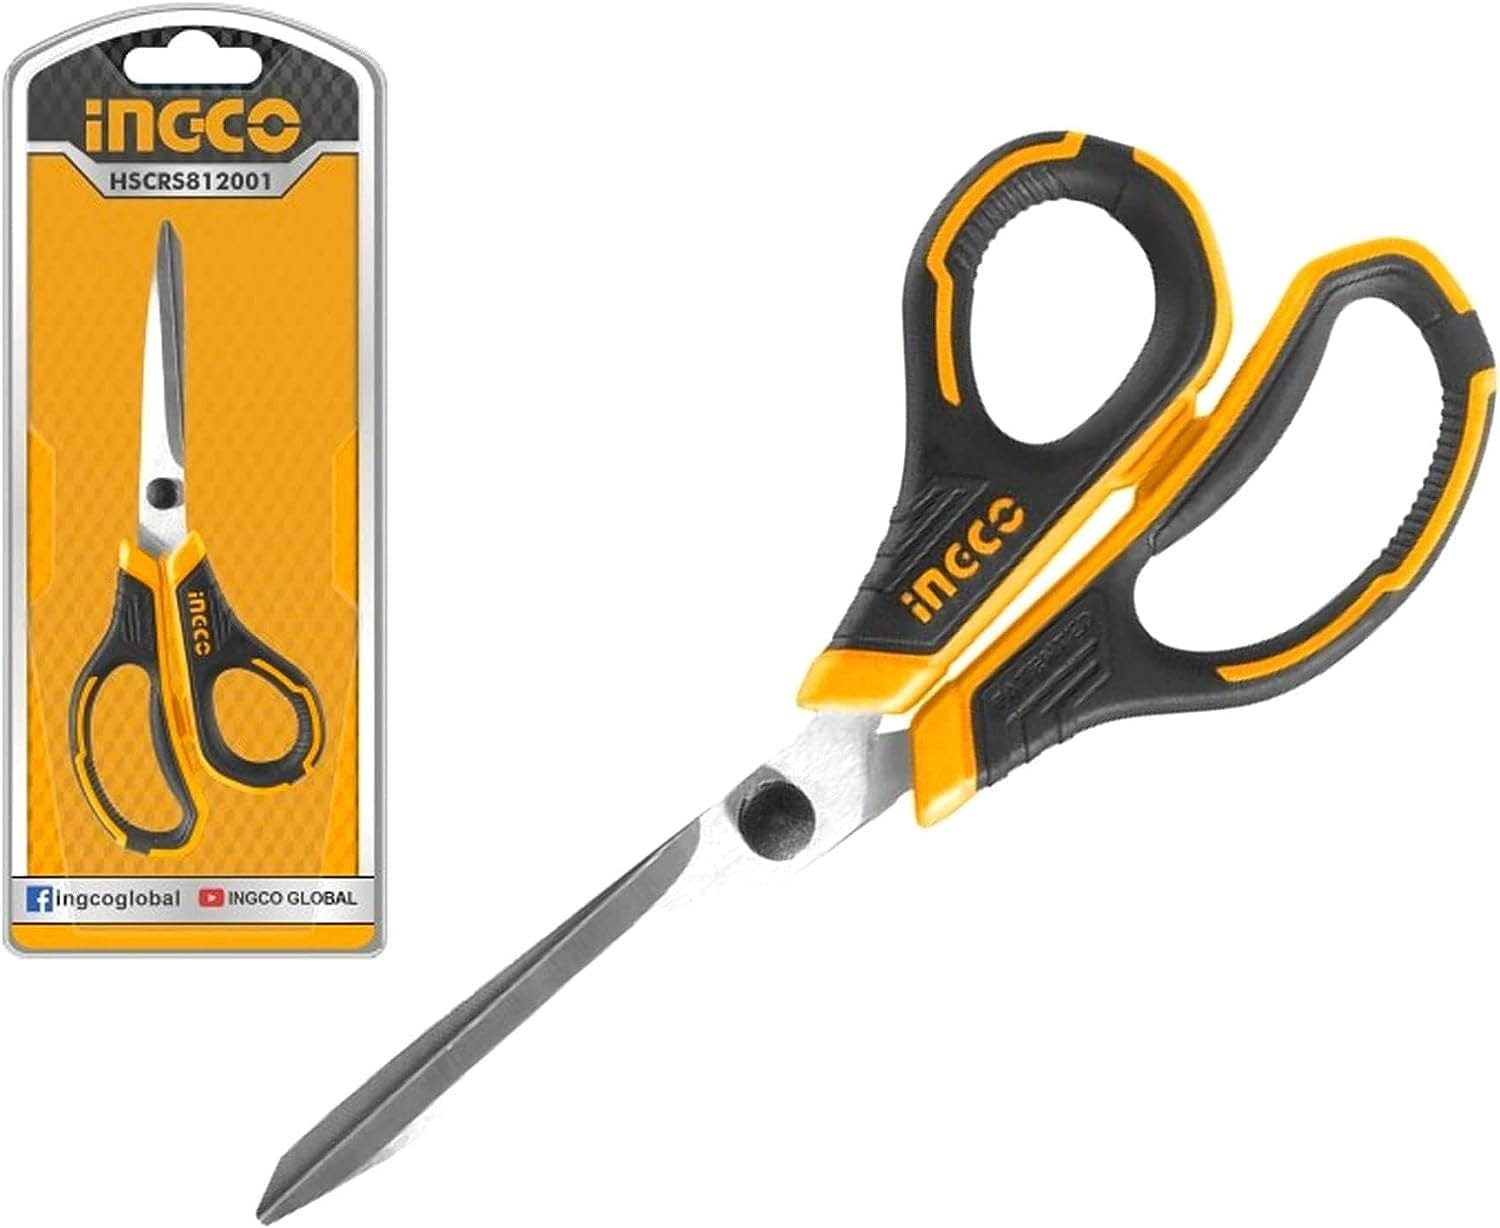 Ingco 8.5" Stainless Steel Scissors - HSCRS811002 | Supply Master Accra, Ghana Hand Saws & Cutting Tools Buy Tools hardware Building materials